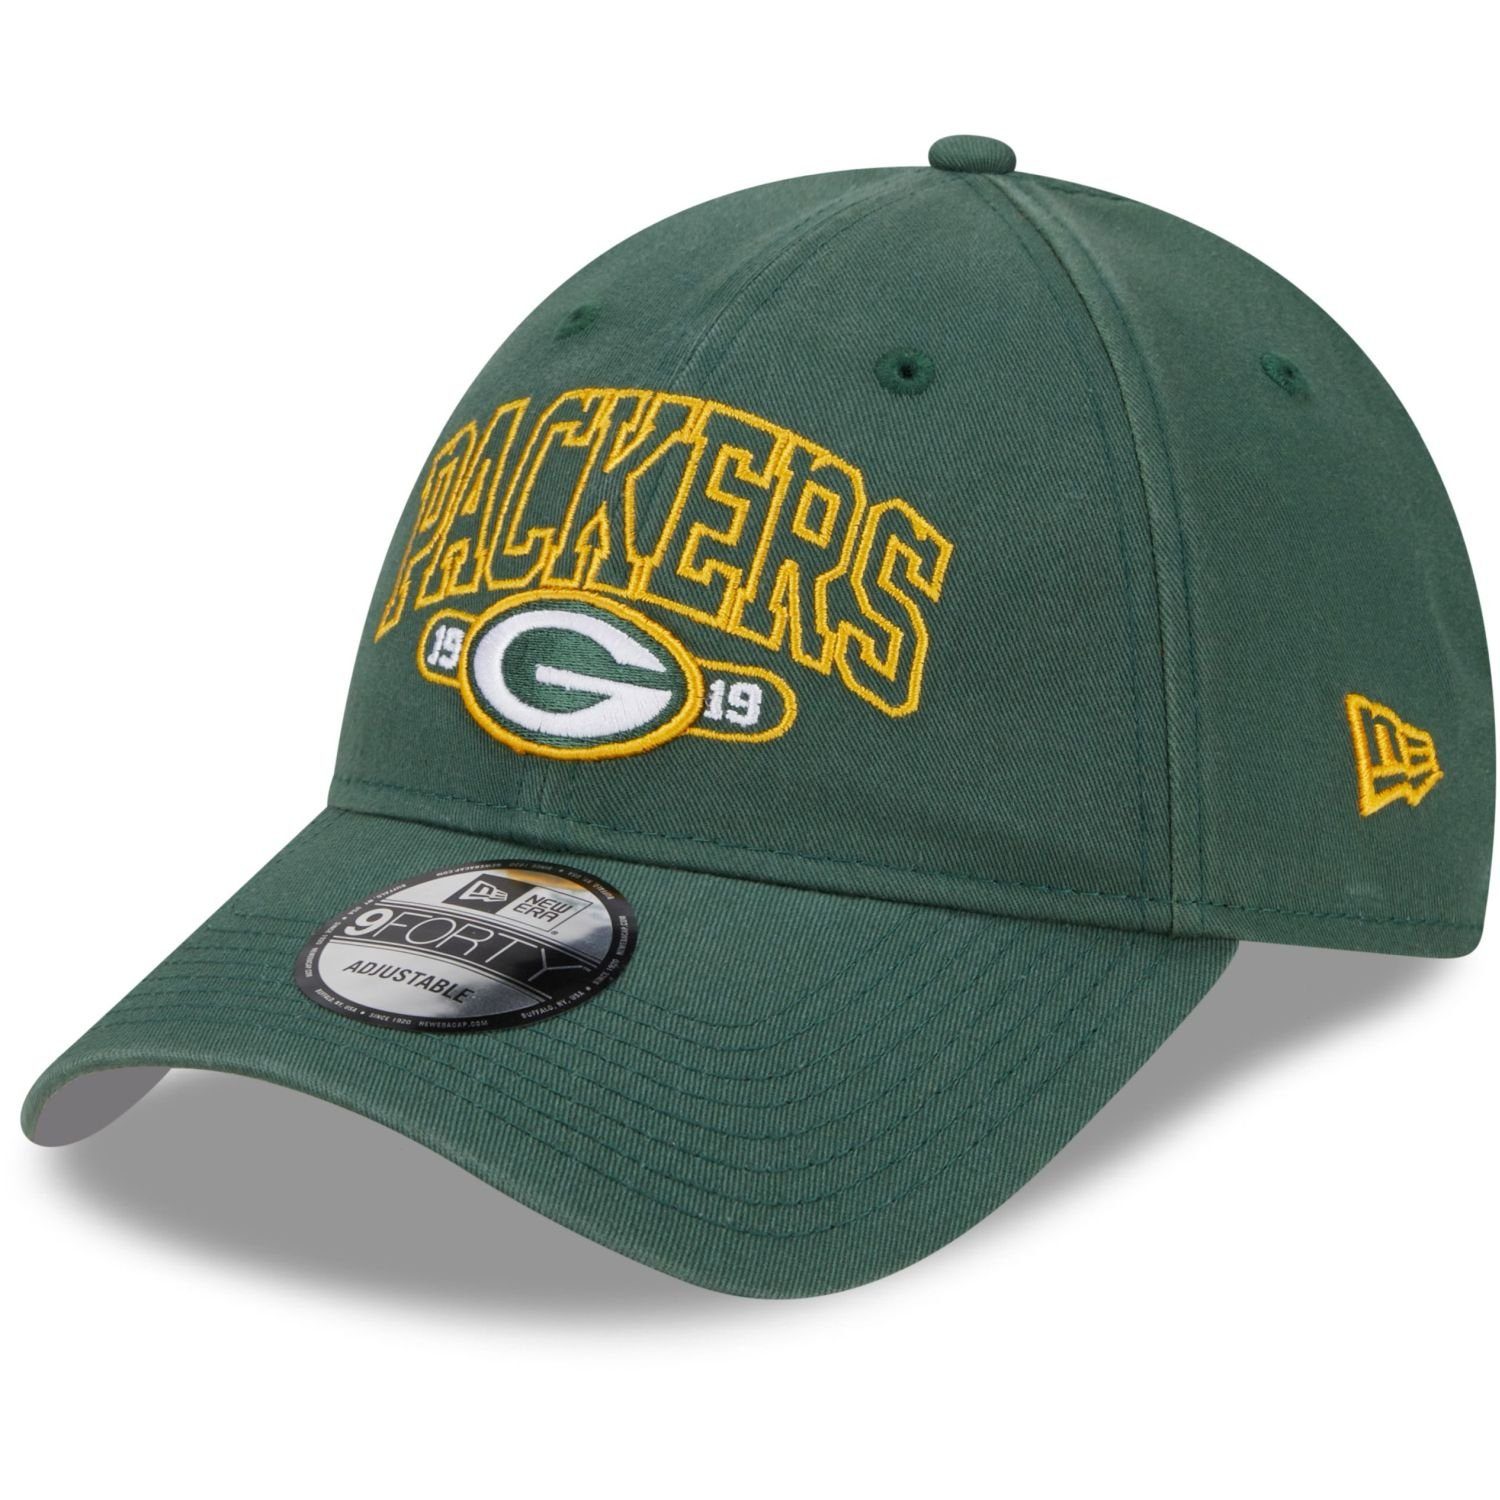 New Era Baseball Cap 9Forty OUTLINE Green Bay Packers